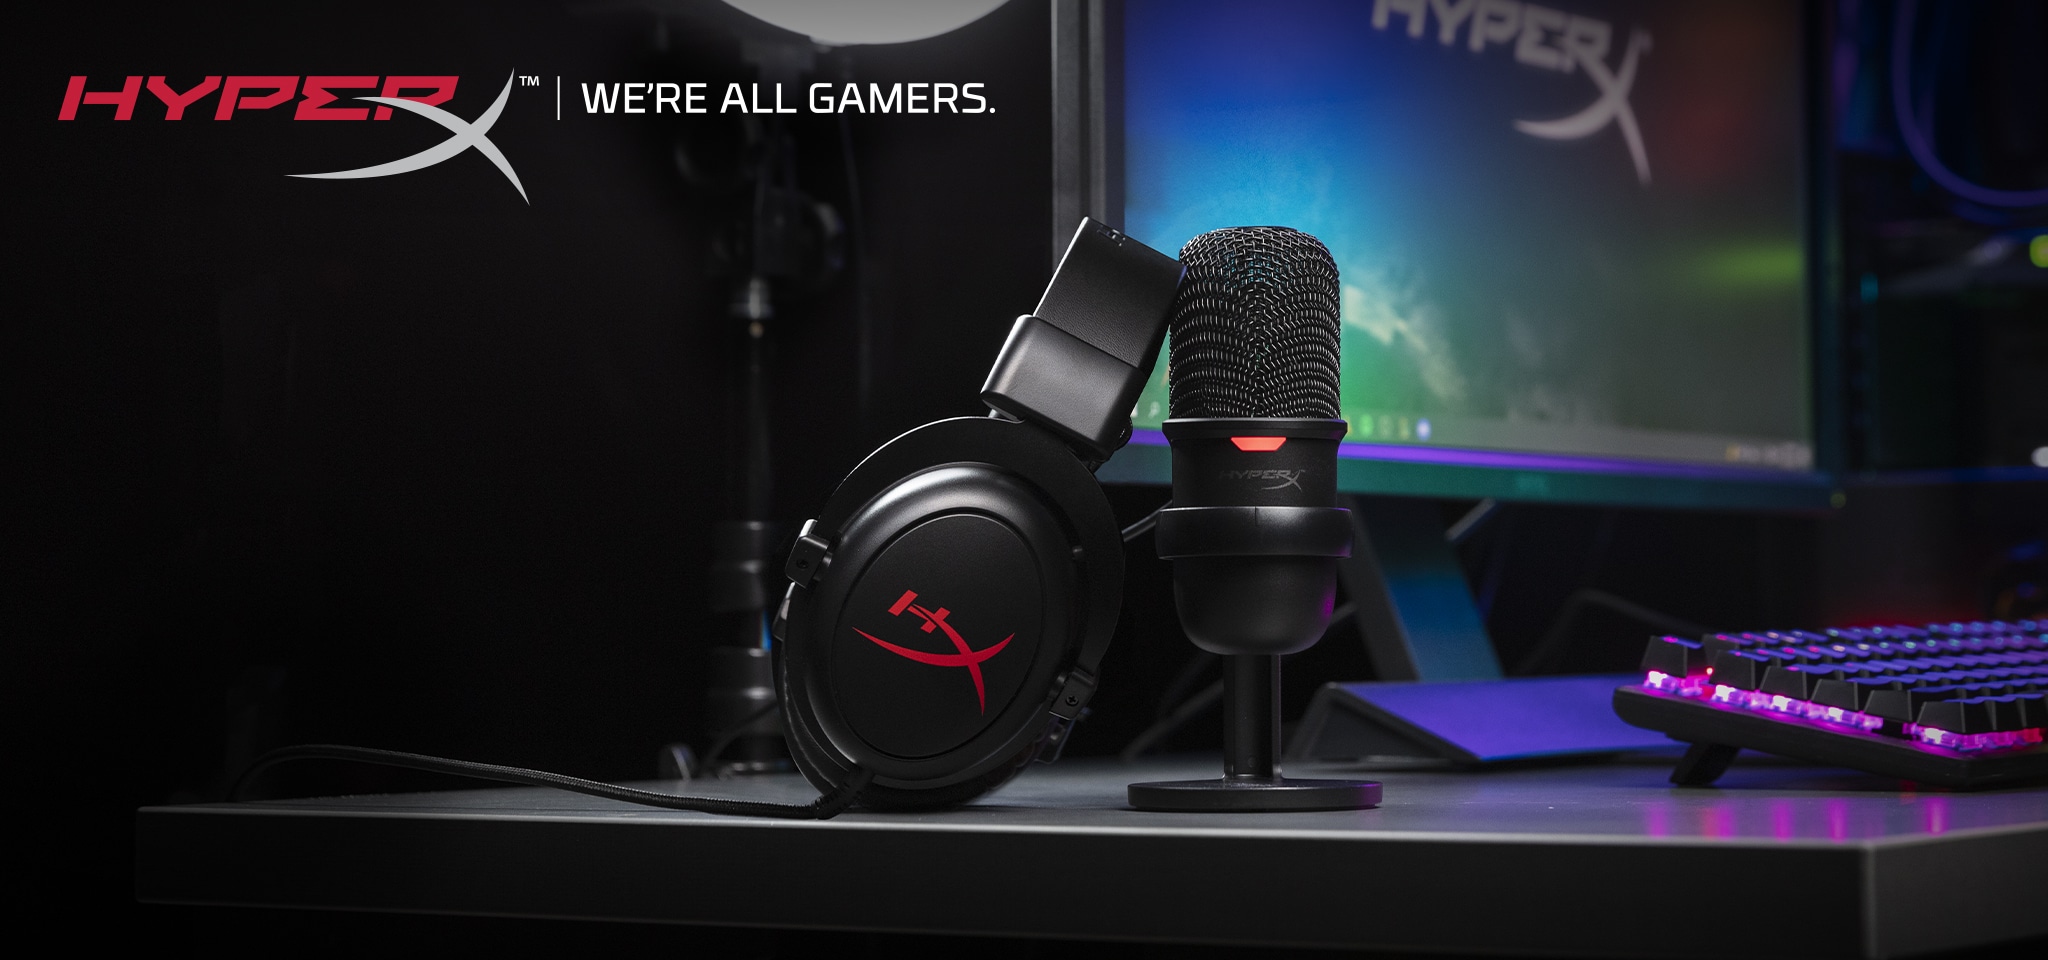 HyperX Teams Up With Best Buy to Offer a Special Streamer Starter Pack 1